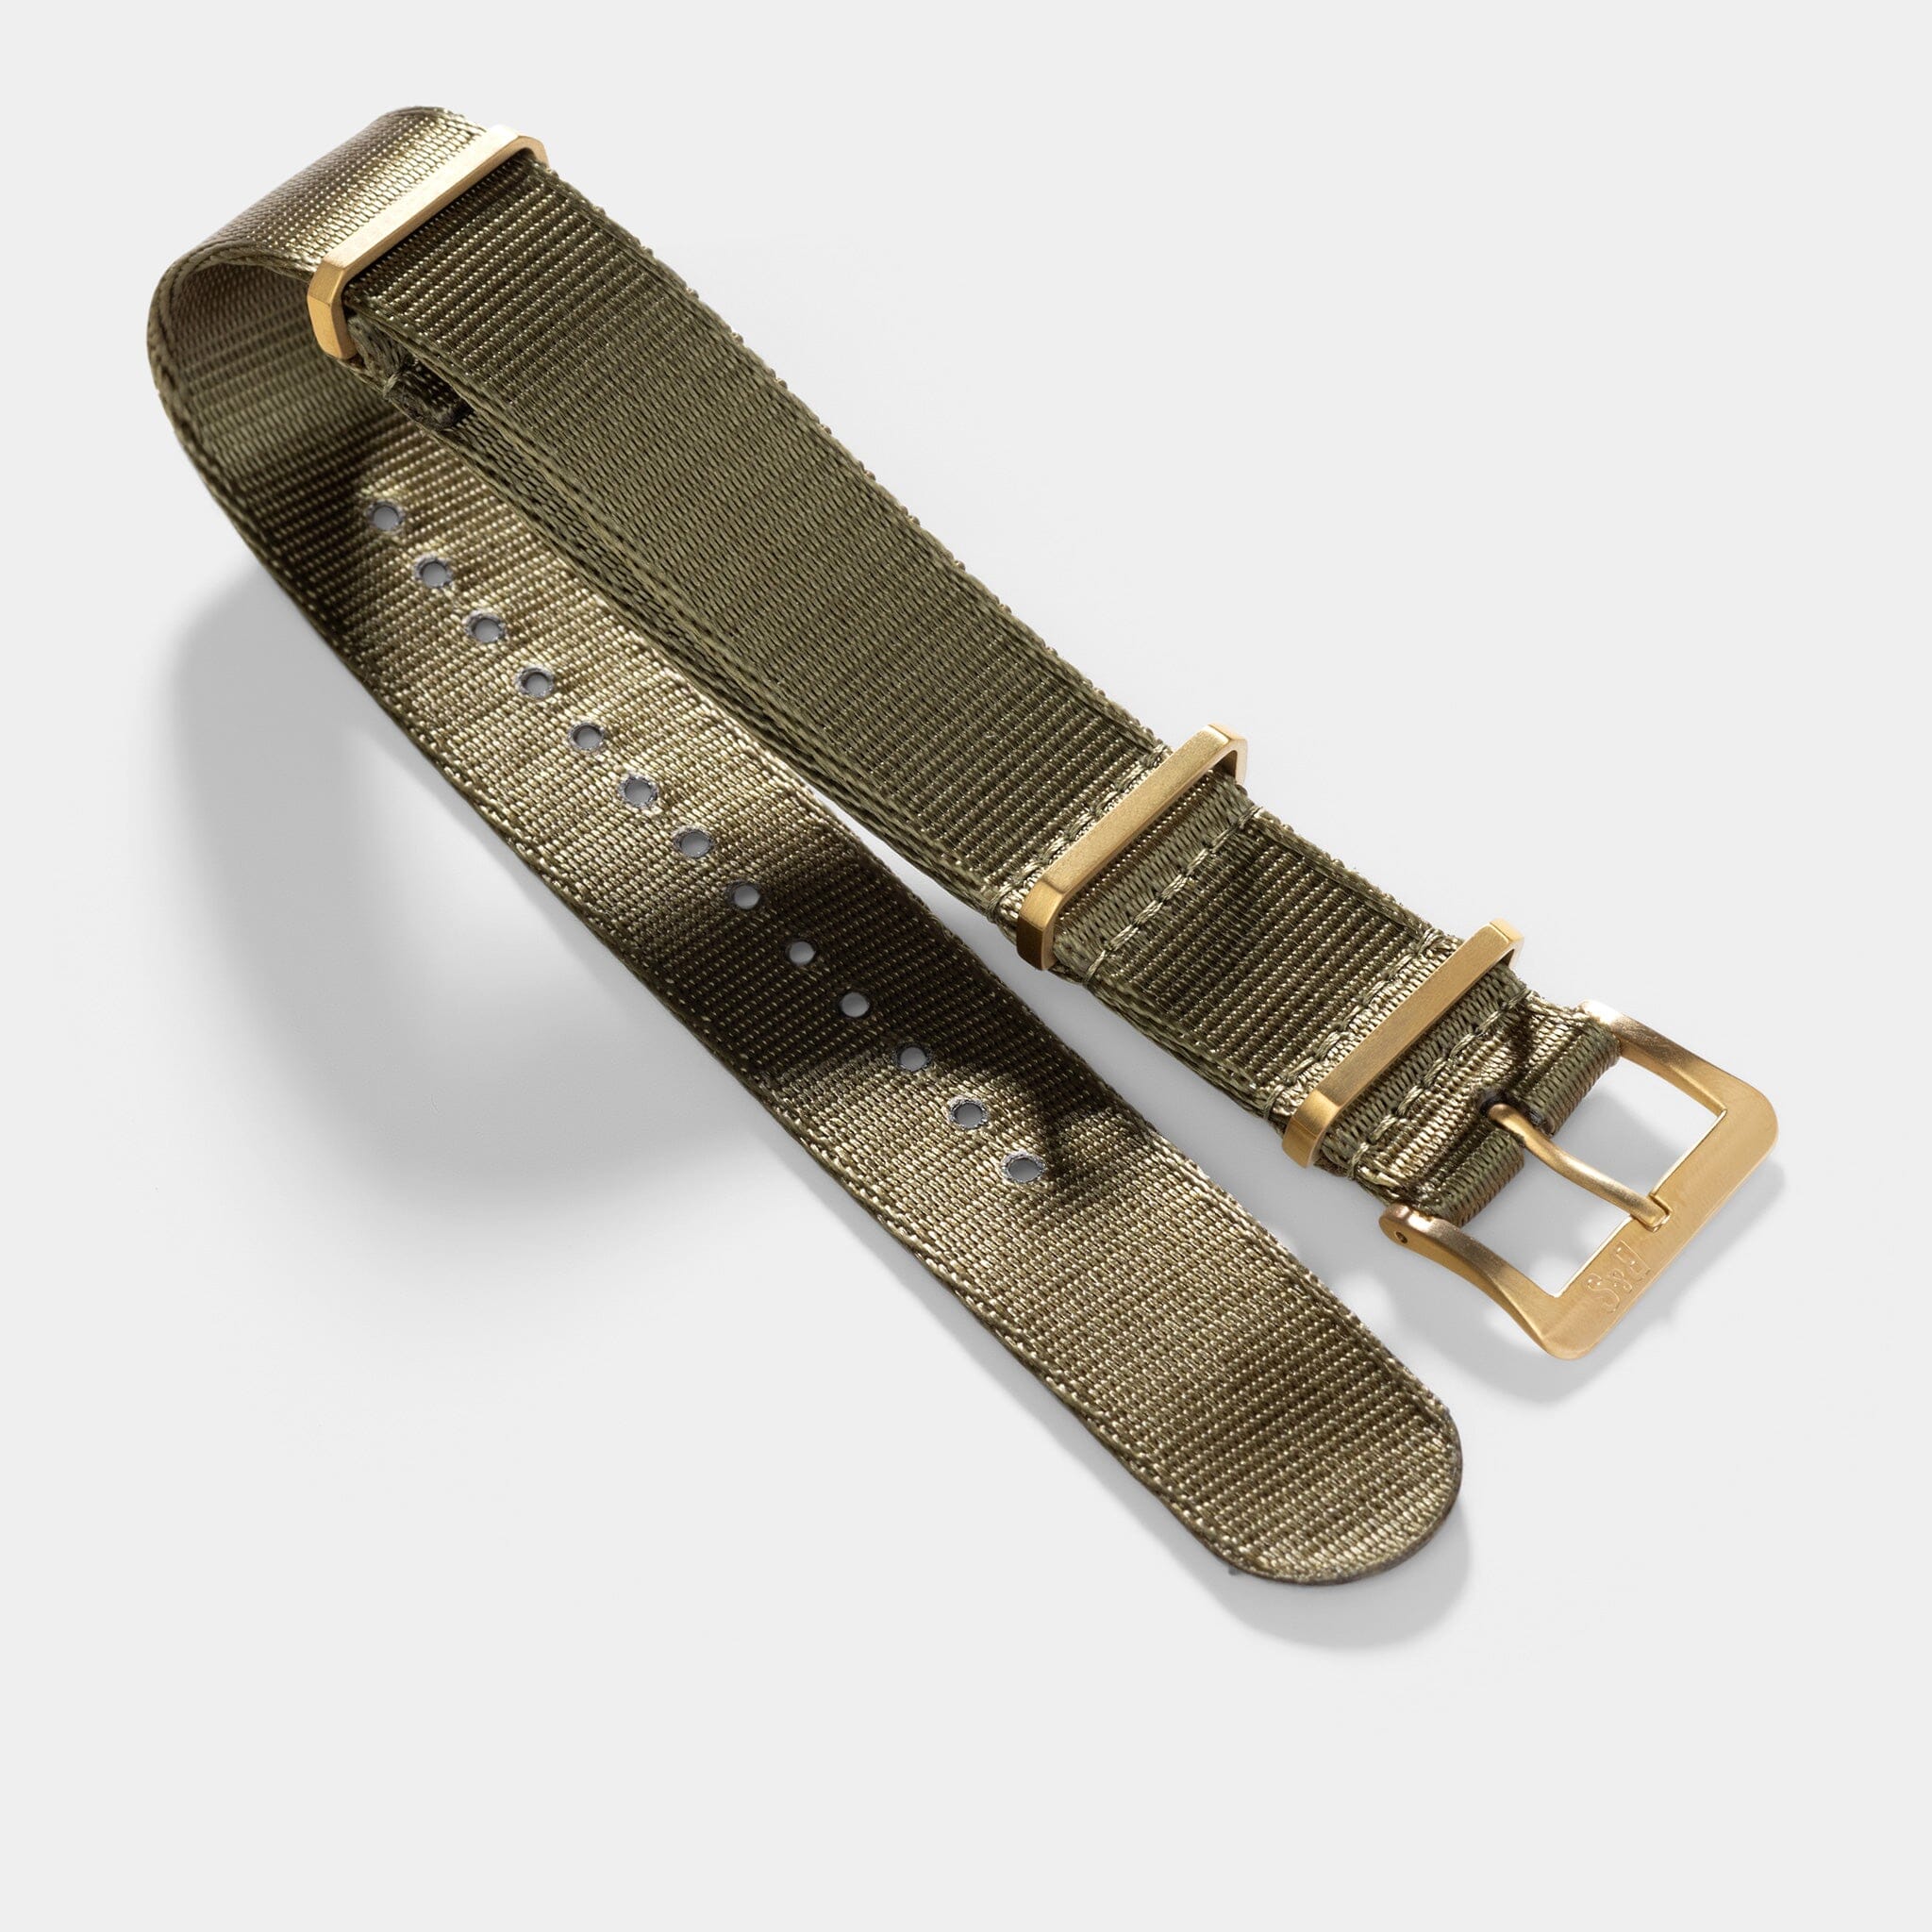 Deluxe Nylon Single Pass Watch Strap Olive Drab Green - Gold Brushed